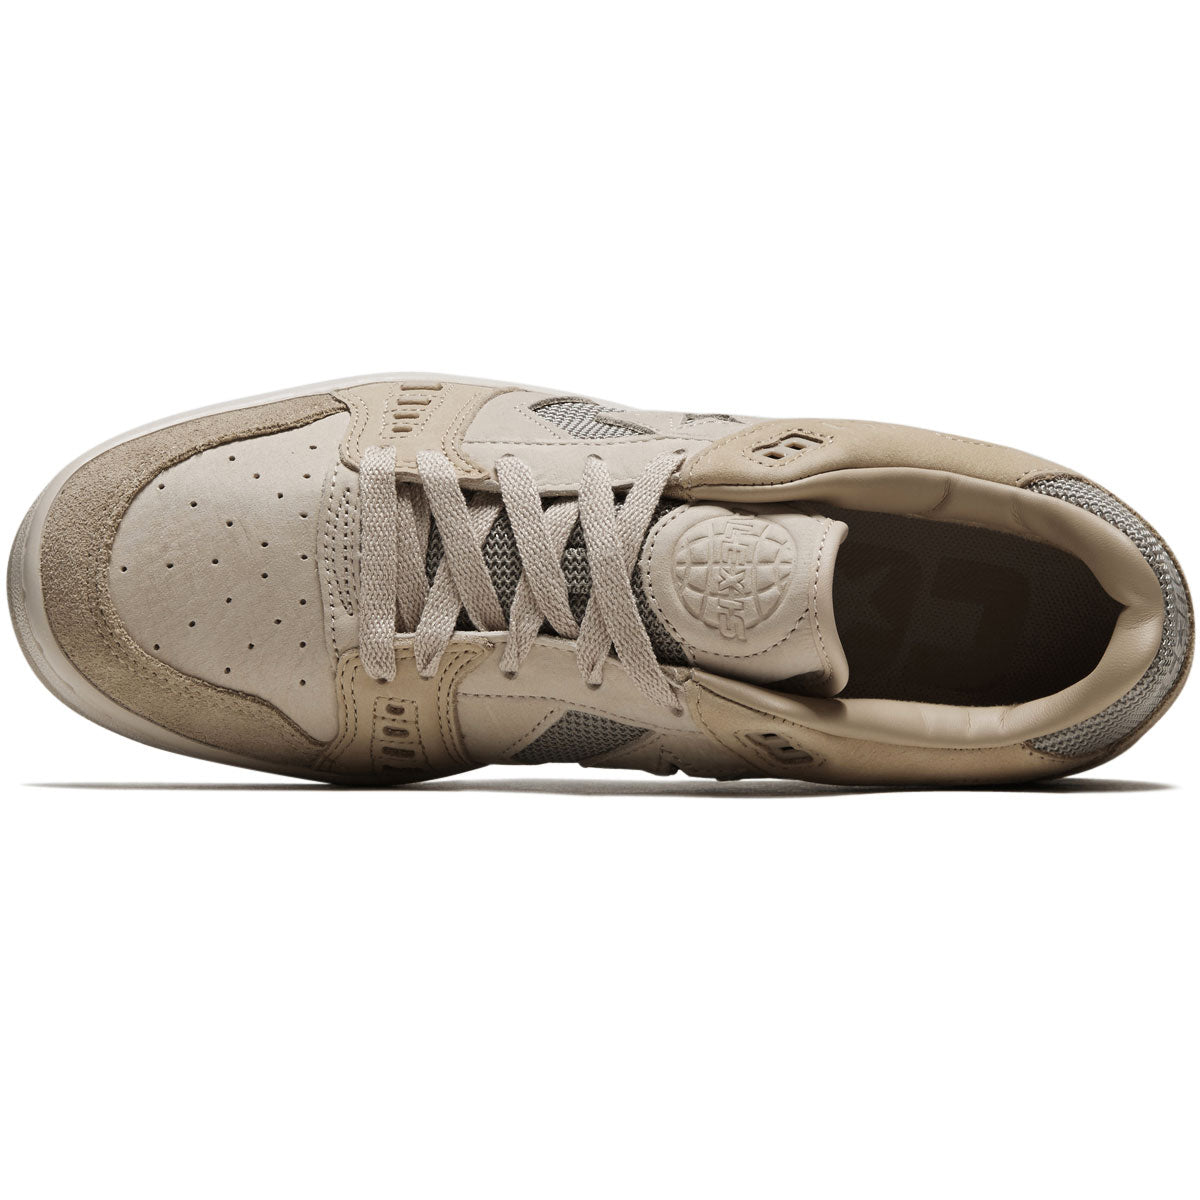 Converse AS-1 Pro Ox Shoes - Shifting Sand/Warm Sand image 3